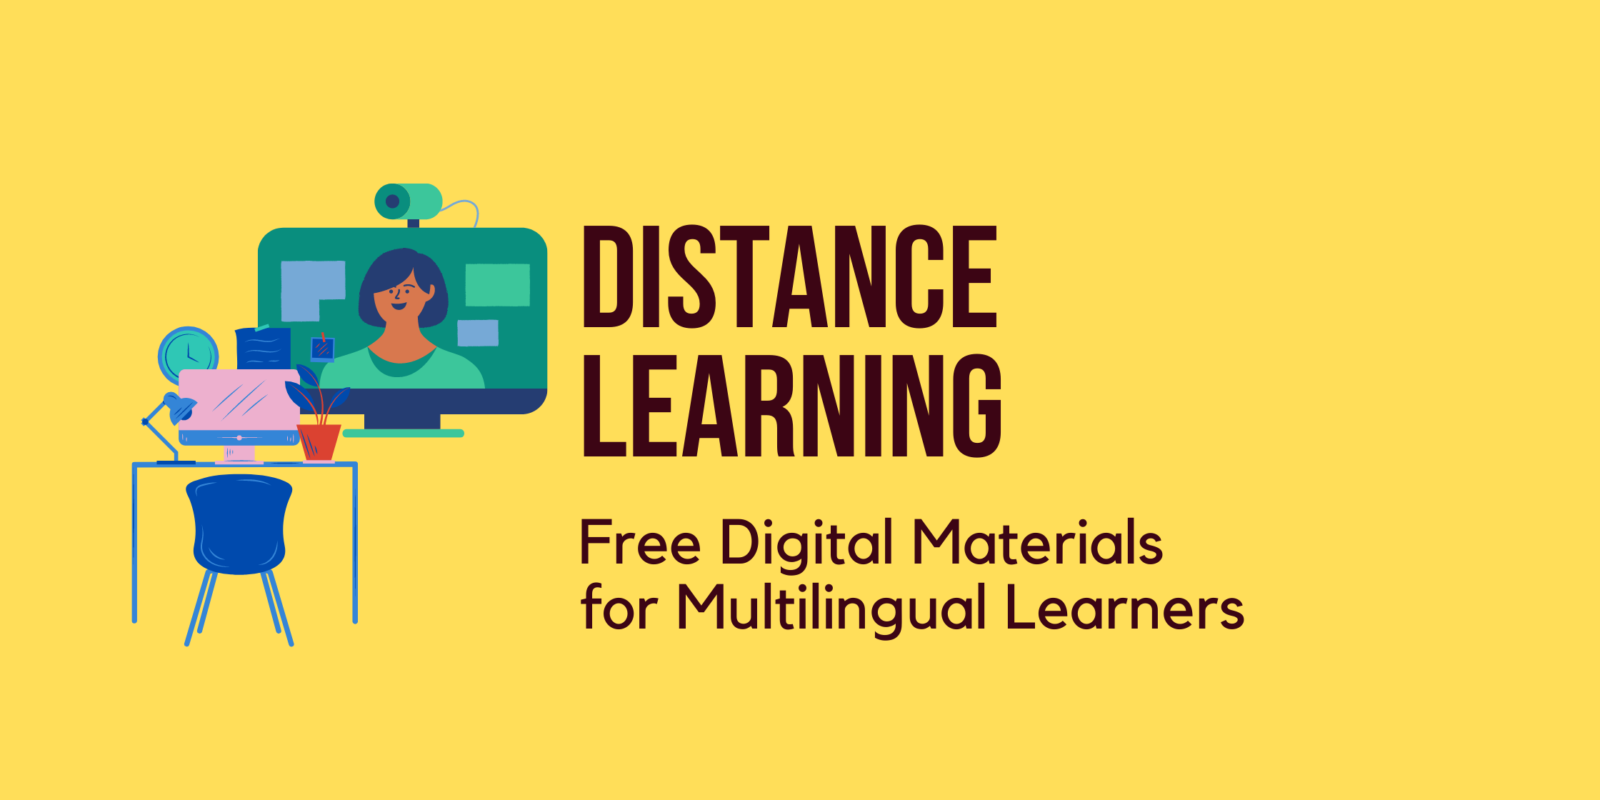 Featured image for “Distance Learning for Multilingual Learners”